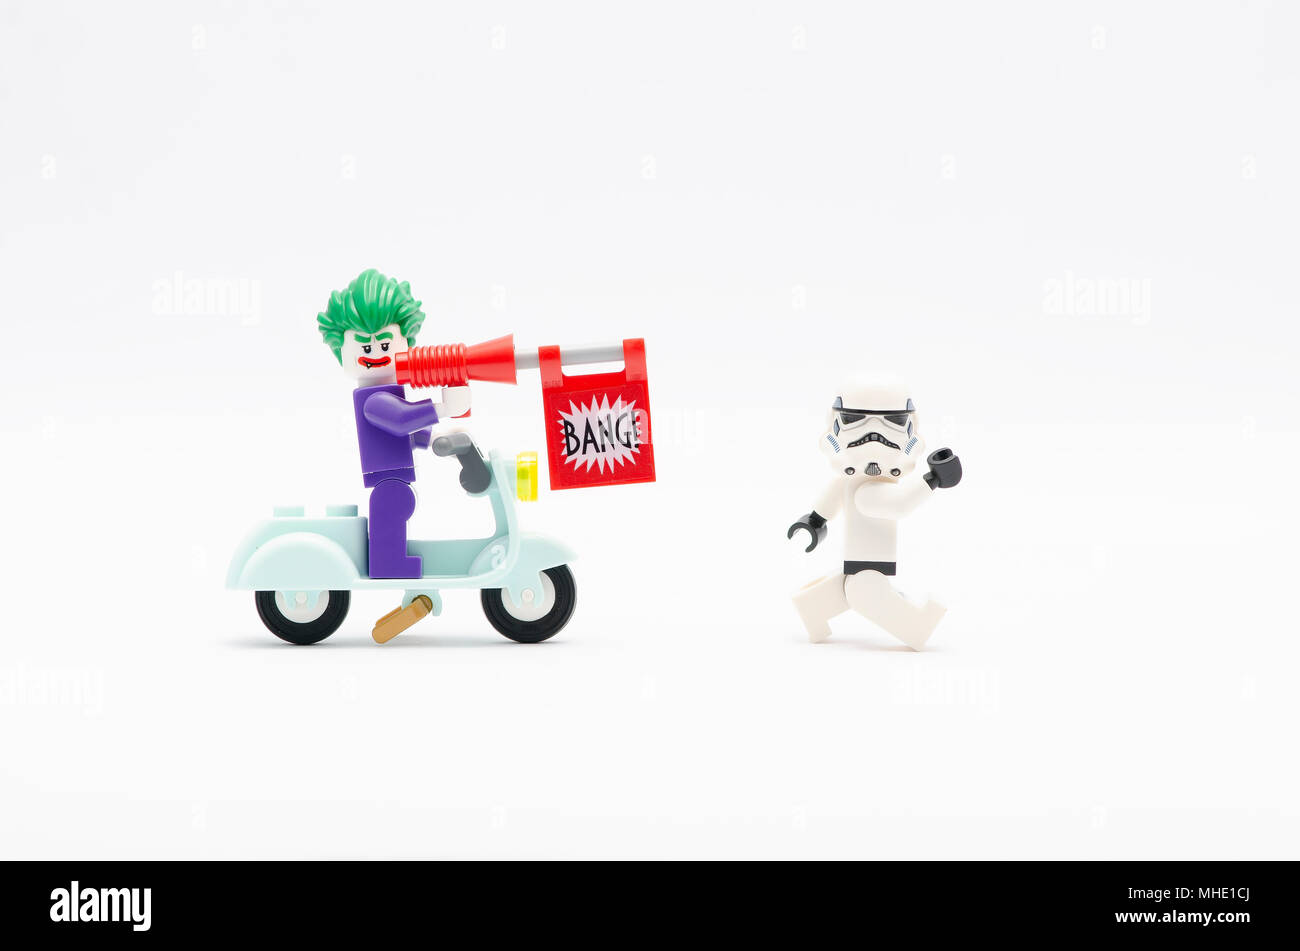 mini figure of joker riding scooter with bang gun chasing storm trooper. Lego minifigures are manufactured by The Lego Group. Stock Photo